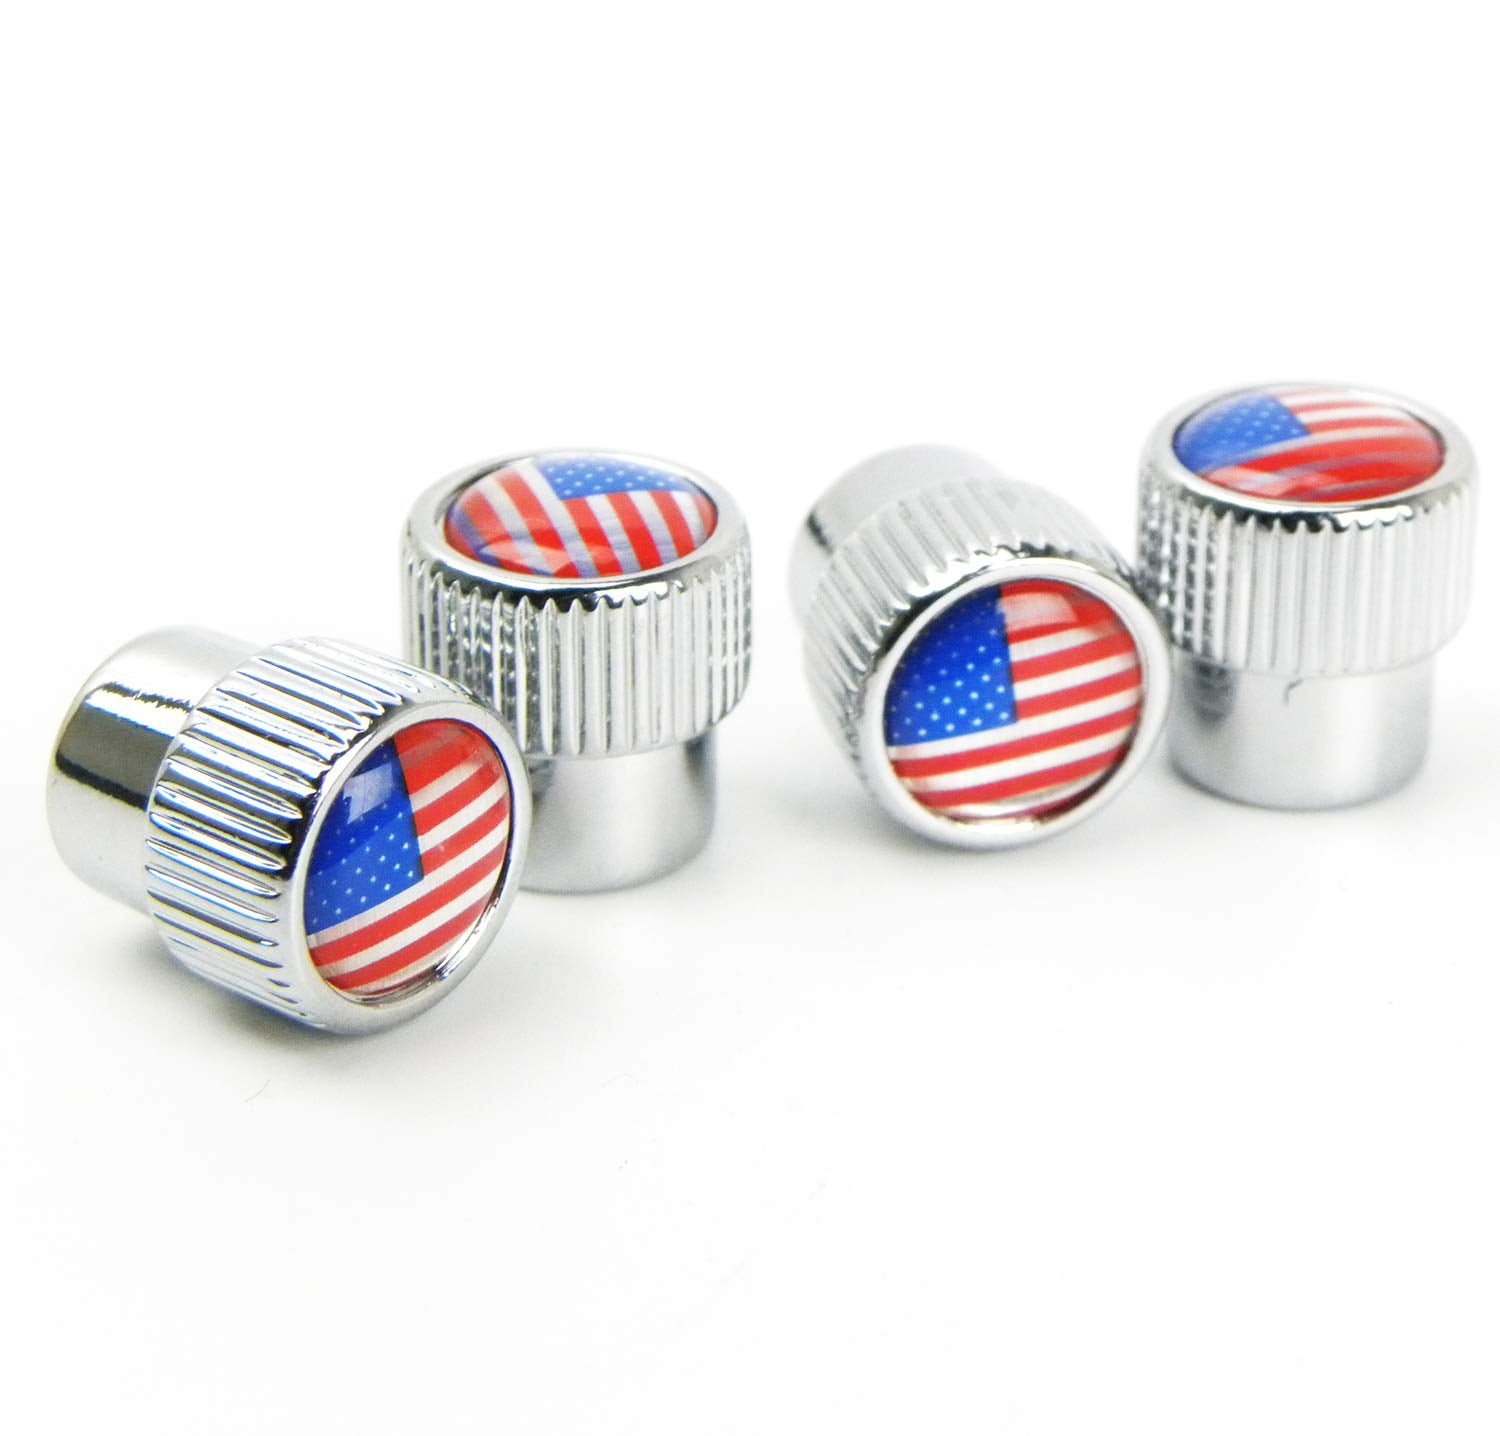 Keychain with United States of America Flag 1pcs 4pcs INCART USA Flag Universal Tire Caps Steel Black Car Tire Valve Stem Air Caps Cover + 